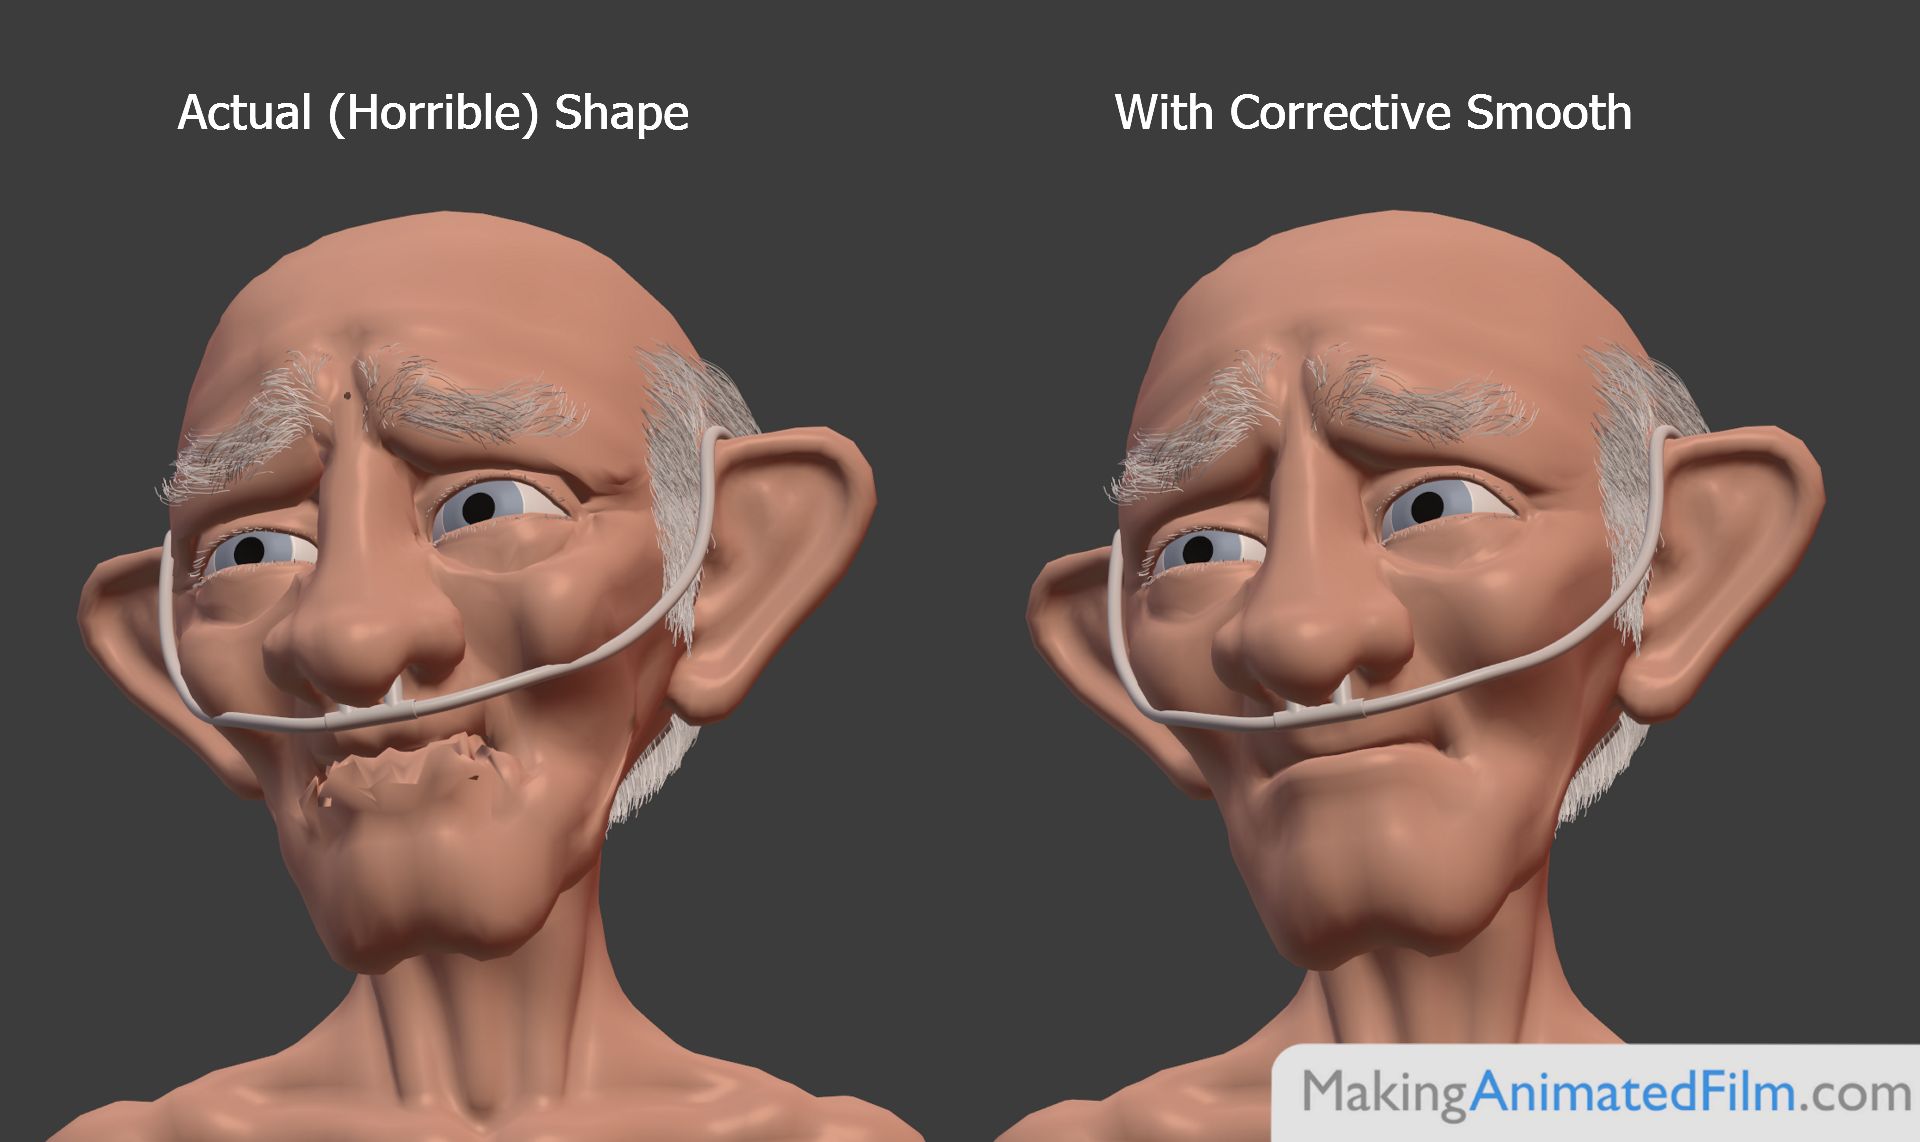 A comparison between the actual deformation of the face with the corrected version using the corrective smooth modifier